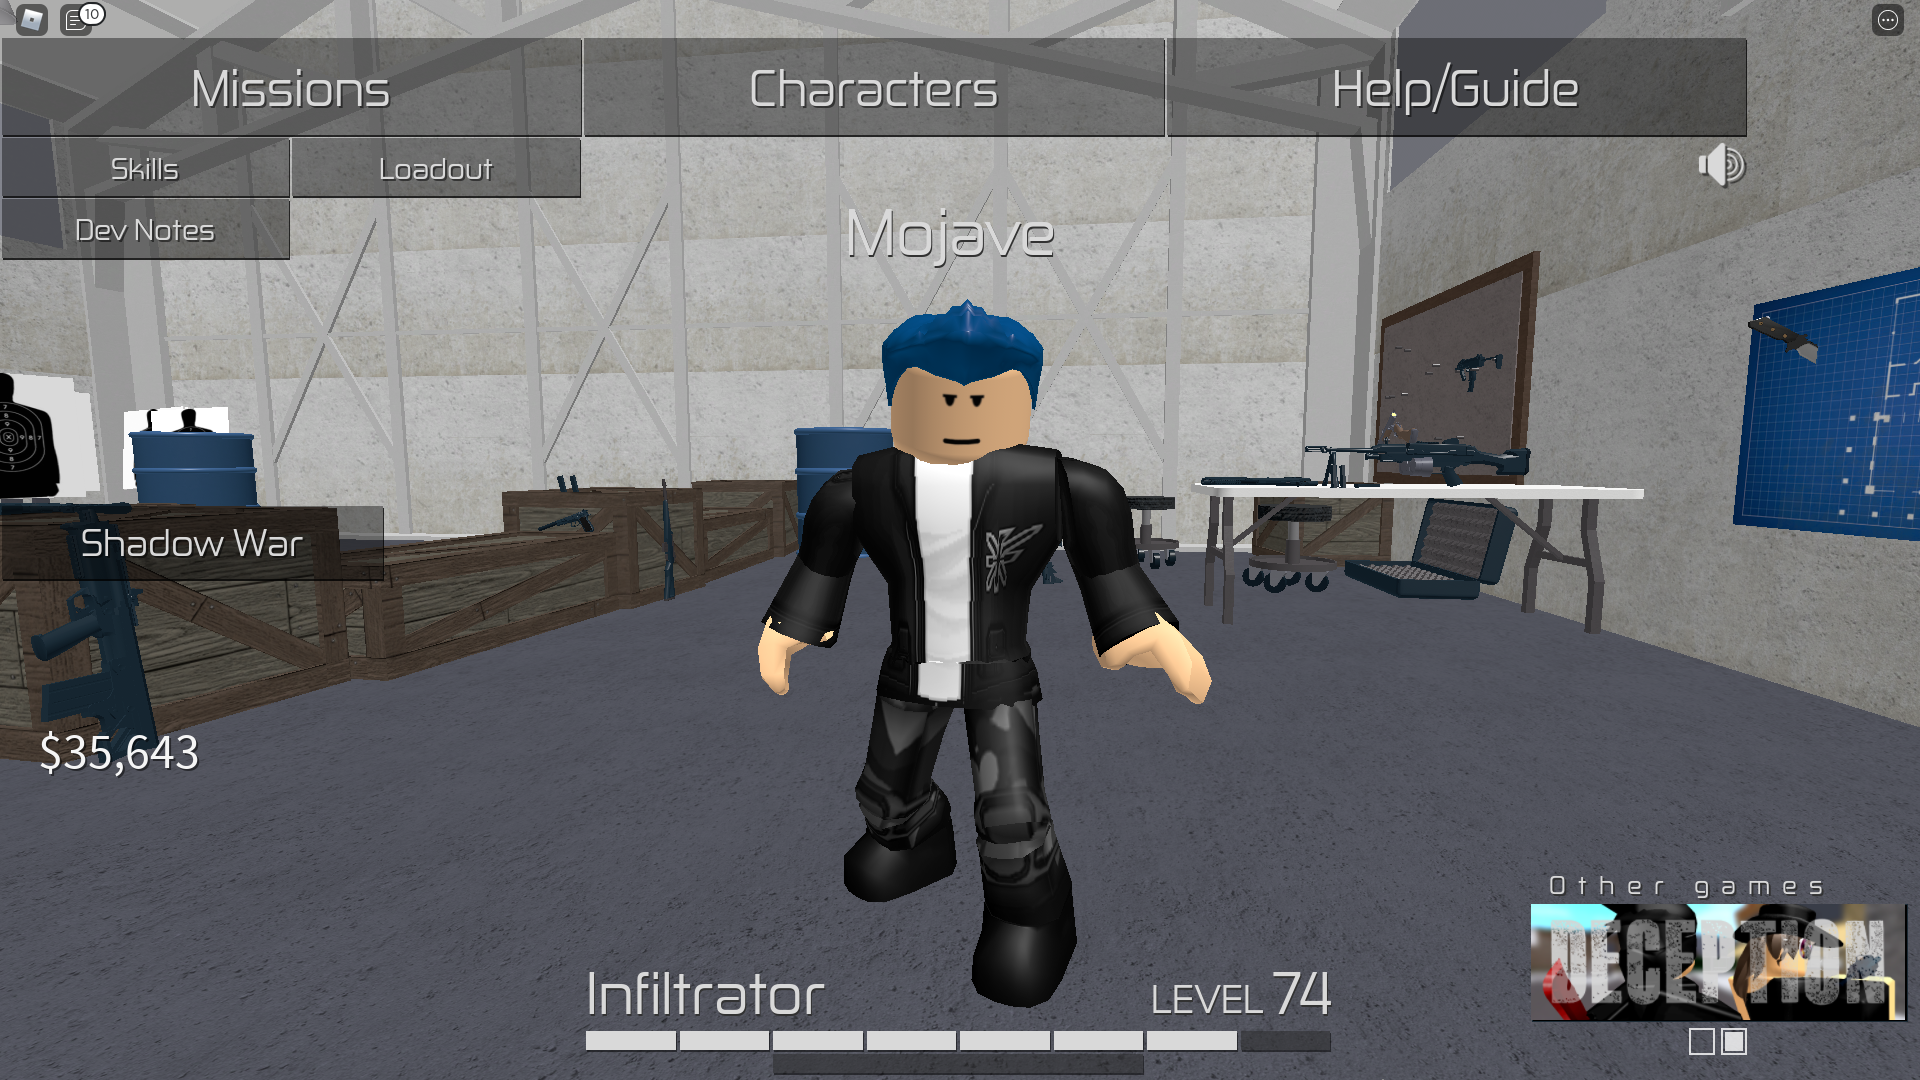 Roblox Shirt ID codes & how to redeem them